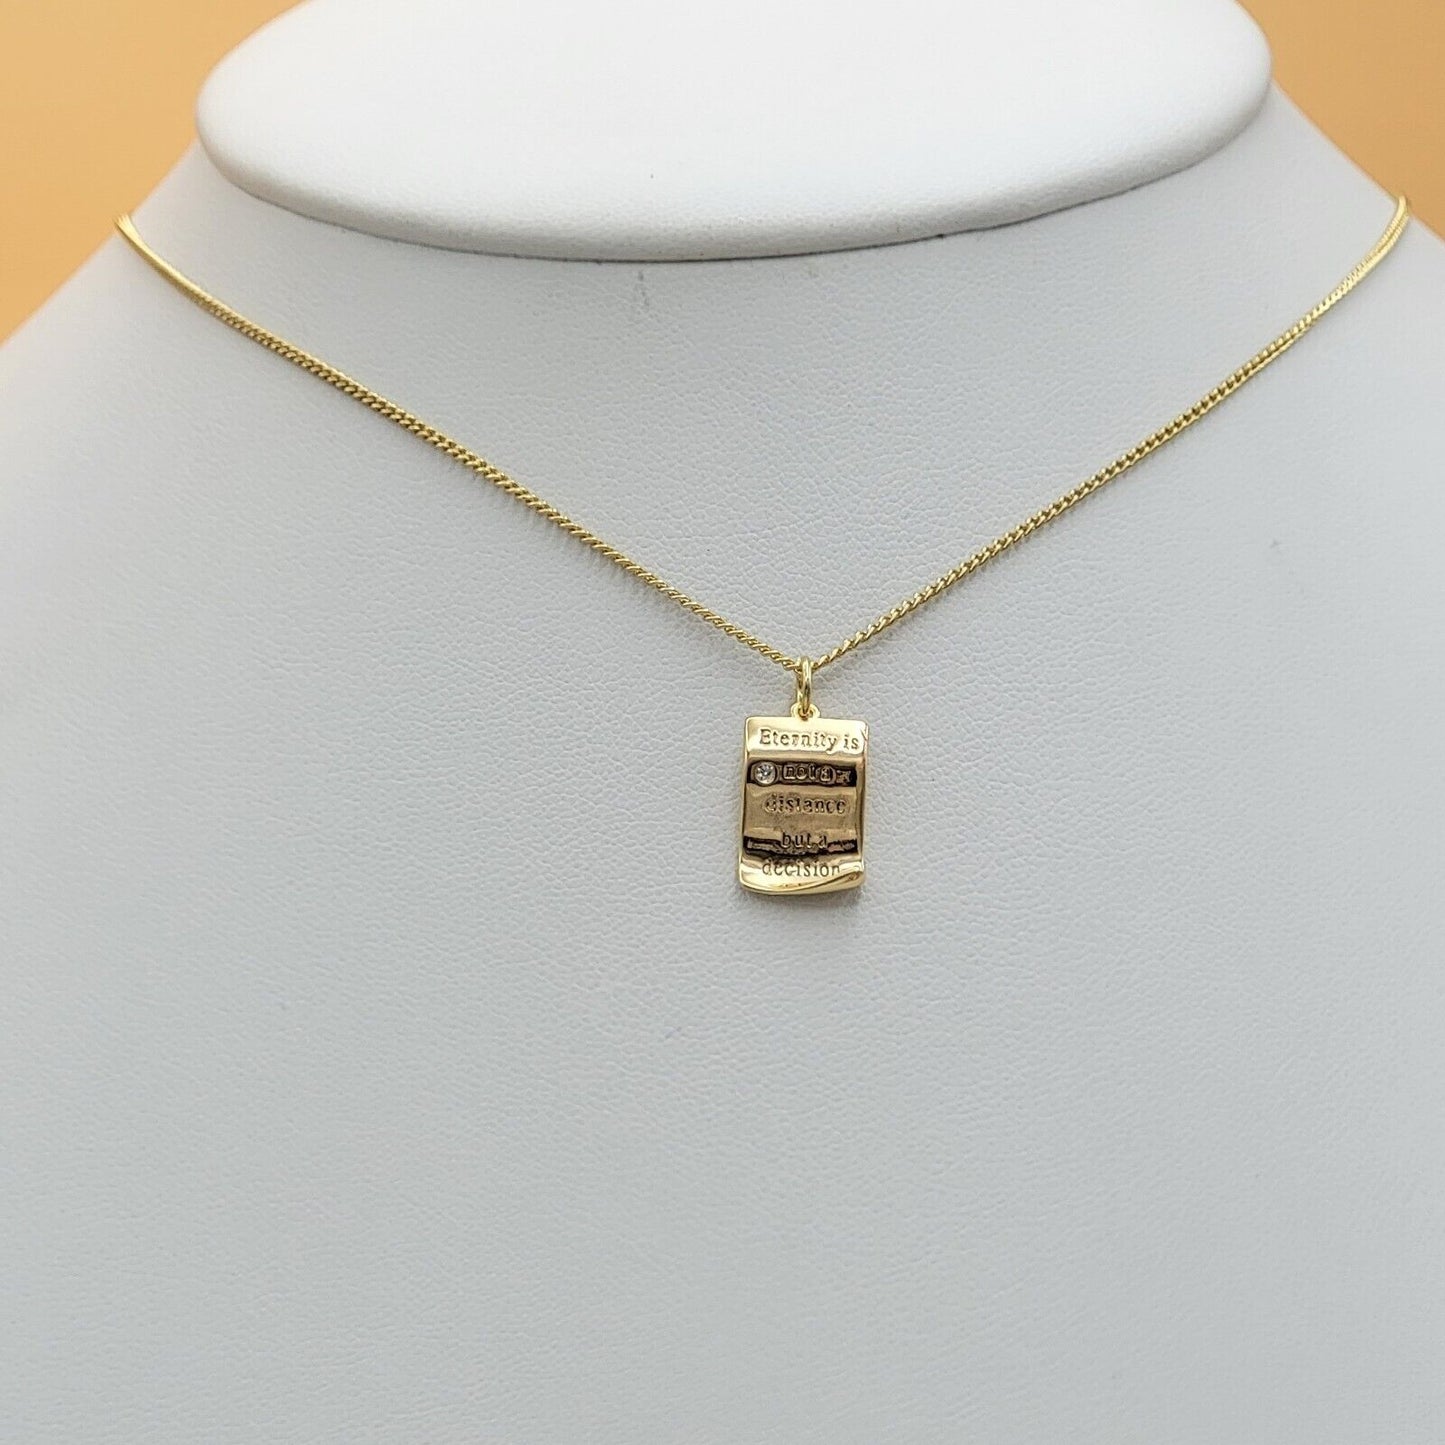 Necklaces - 14K Gold Plated. "Eternity is not a distance but a decision" Scroll Pendant & Chain.